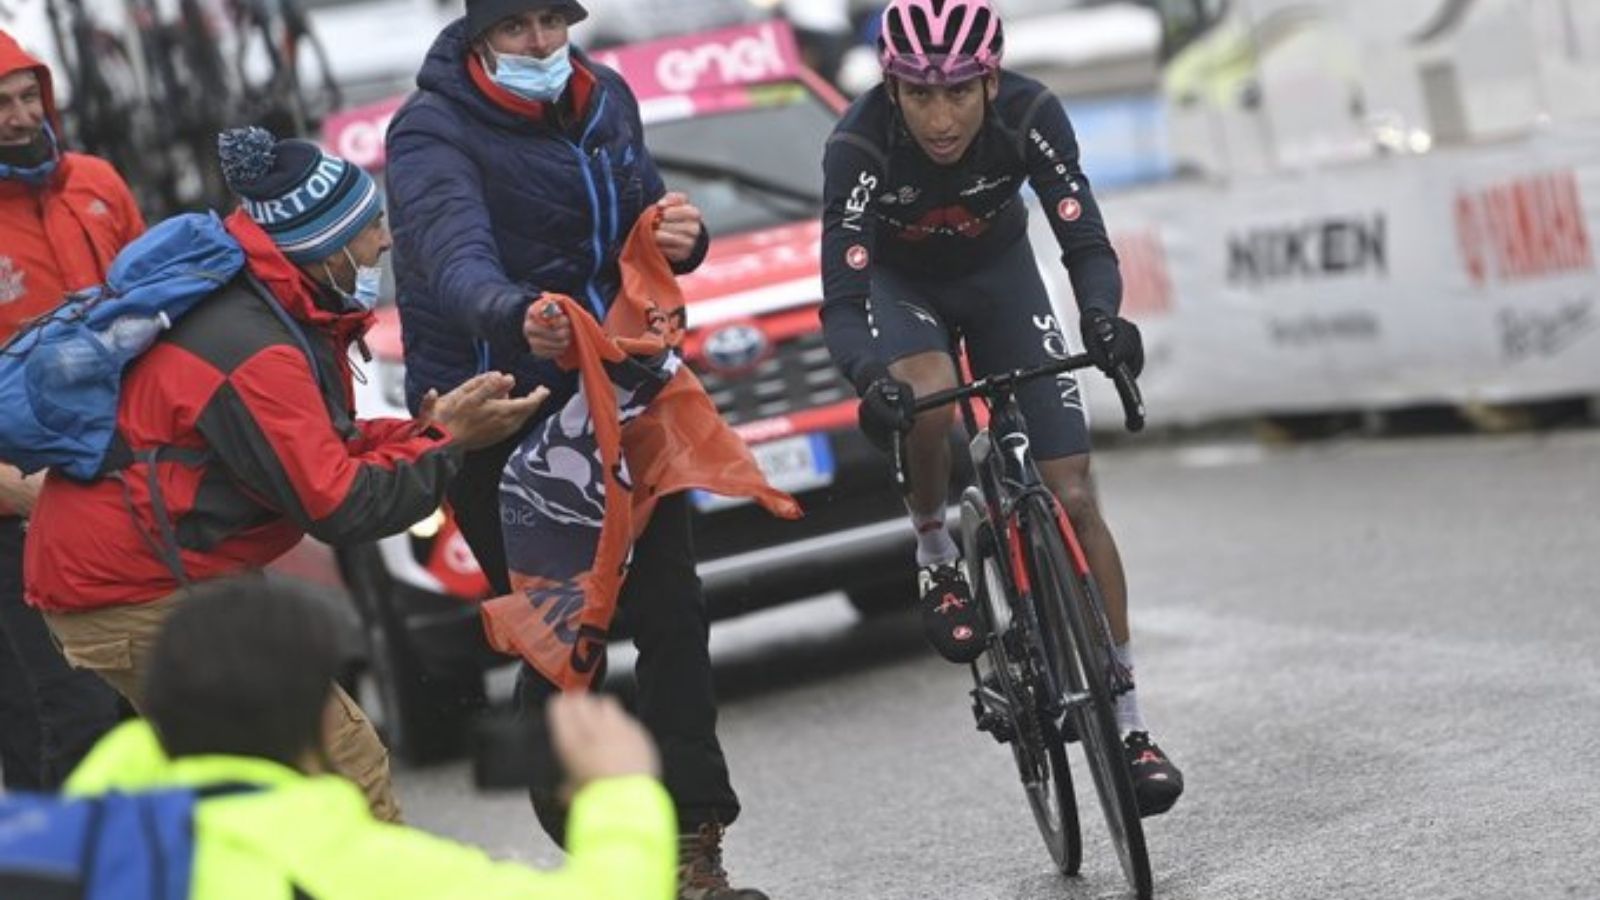 Egan Bernal (INEOS) Grenadiers arrives in Cortina d'Ampezzo on the 16th stage of Giro d'Italia 2021